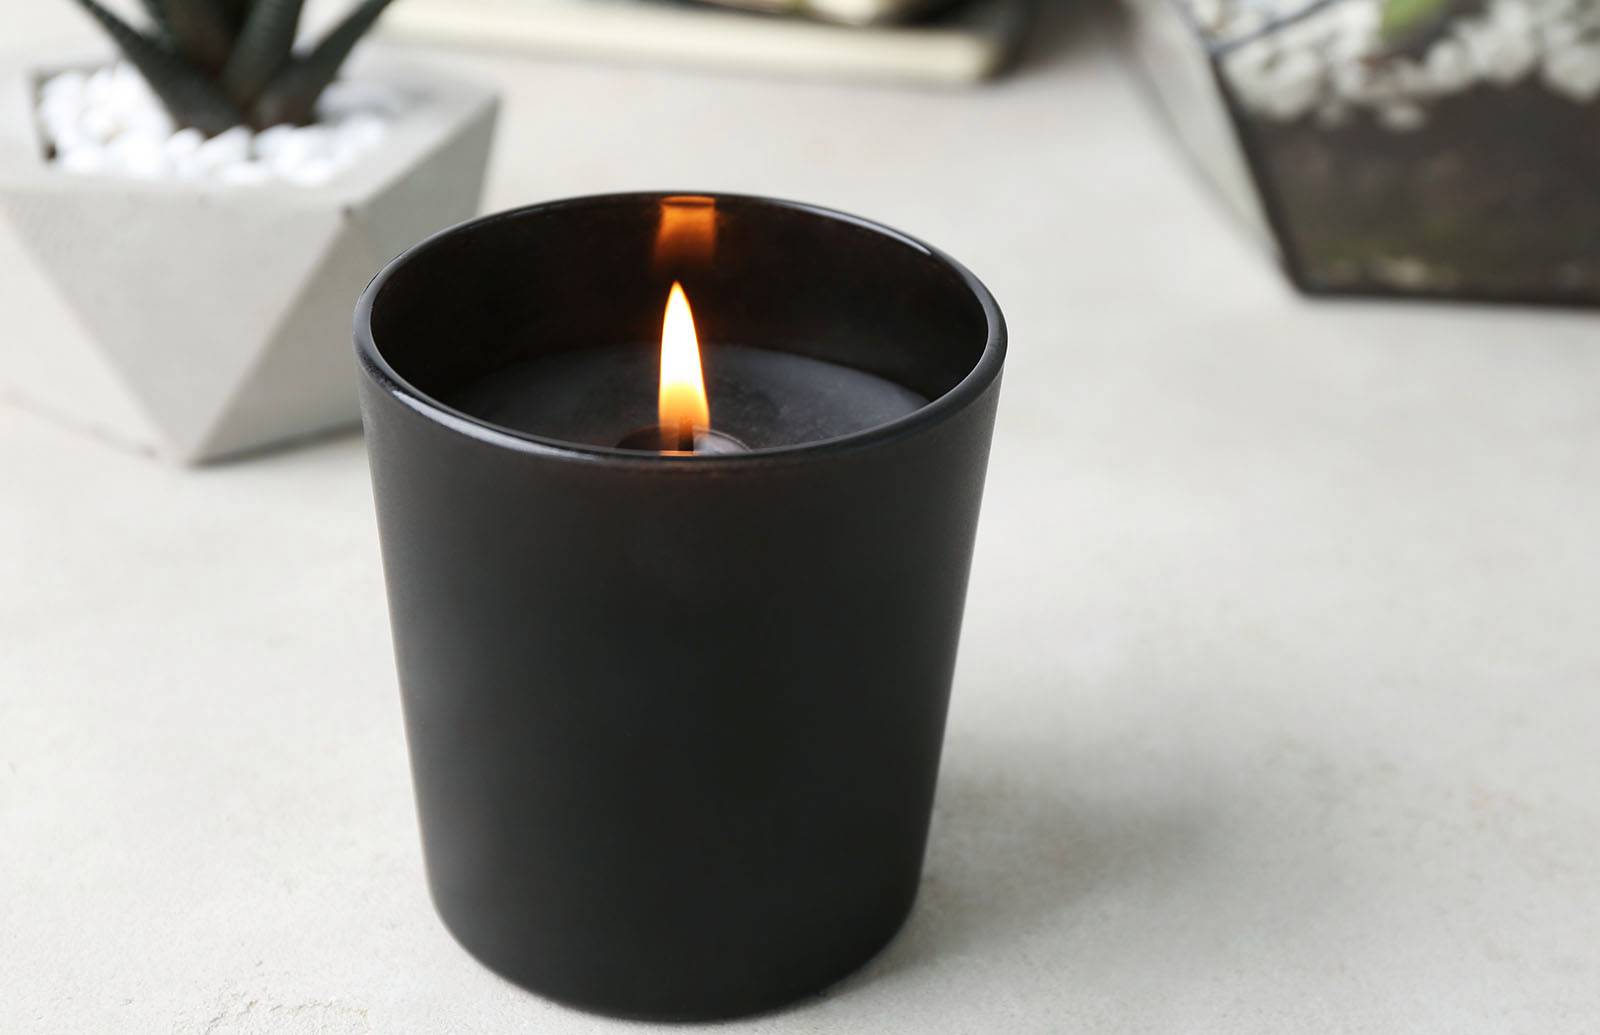 As soon as you procure any of these candles, don’t mild them